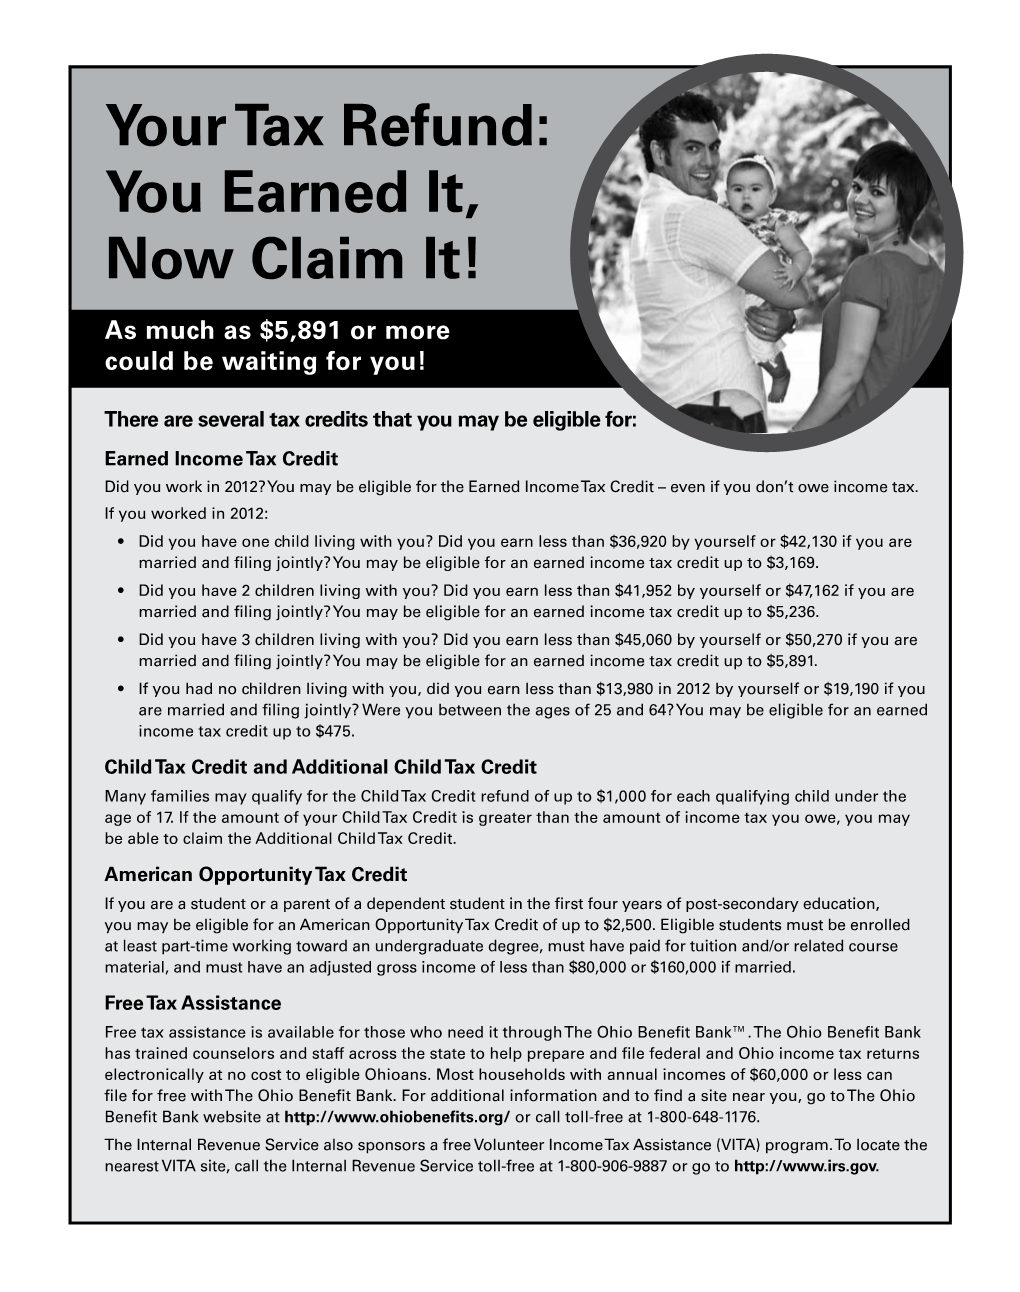 Your Tax Refund: You Earned It, Now Claim It!